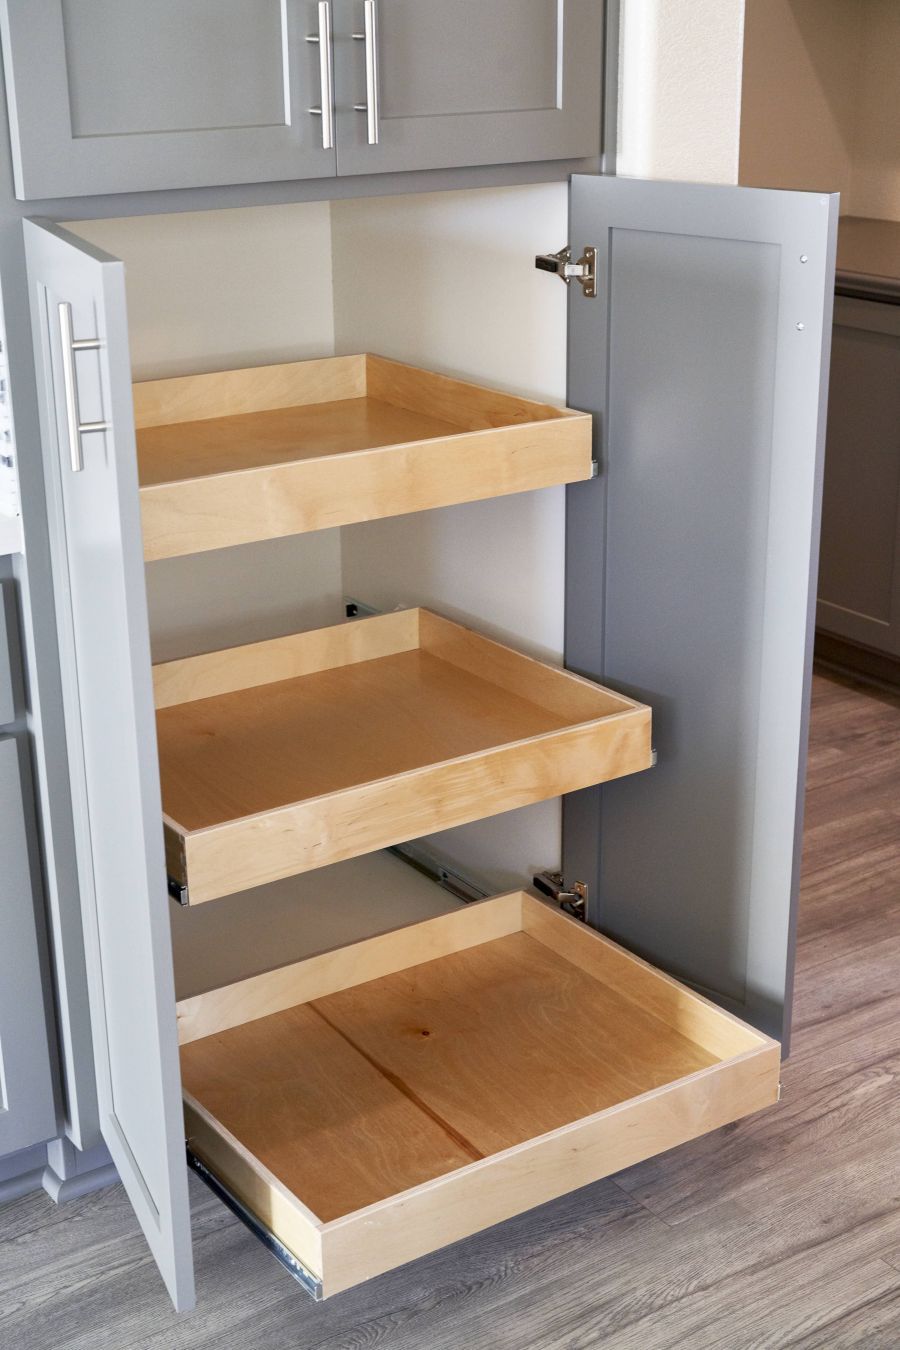 Pantry Option with roll-out drawers